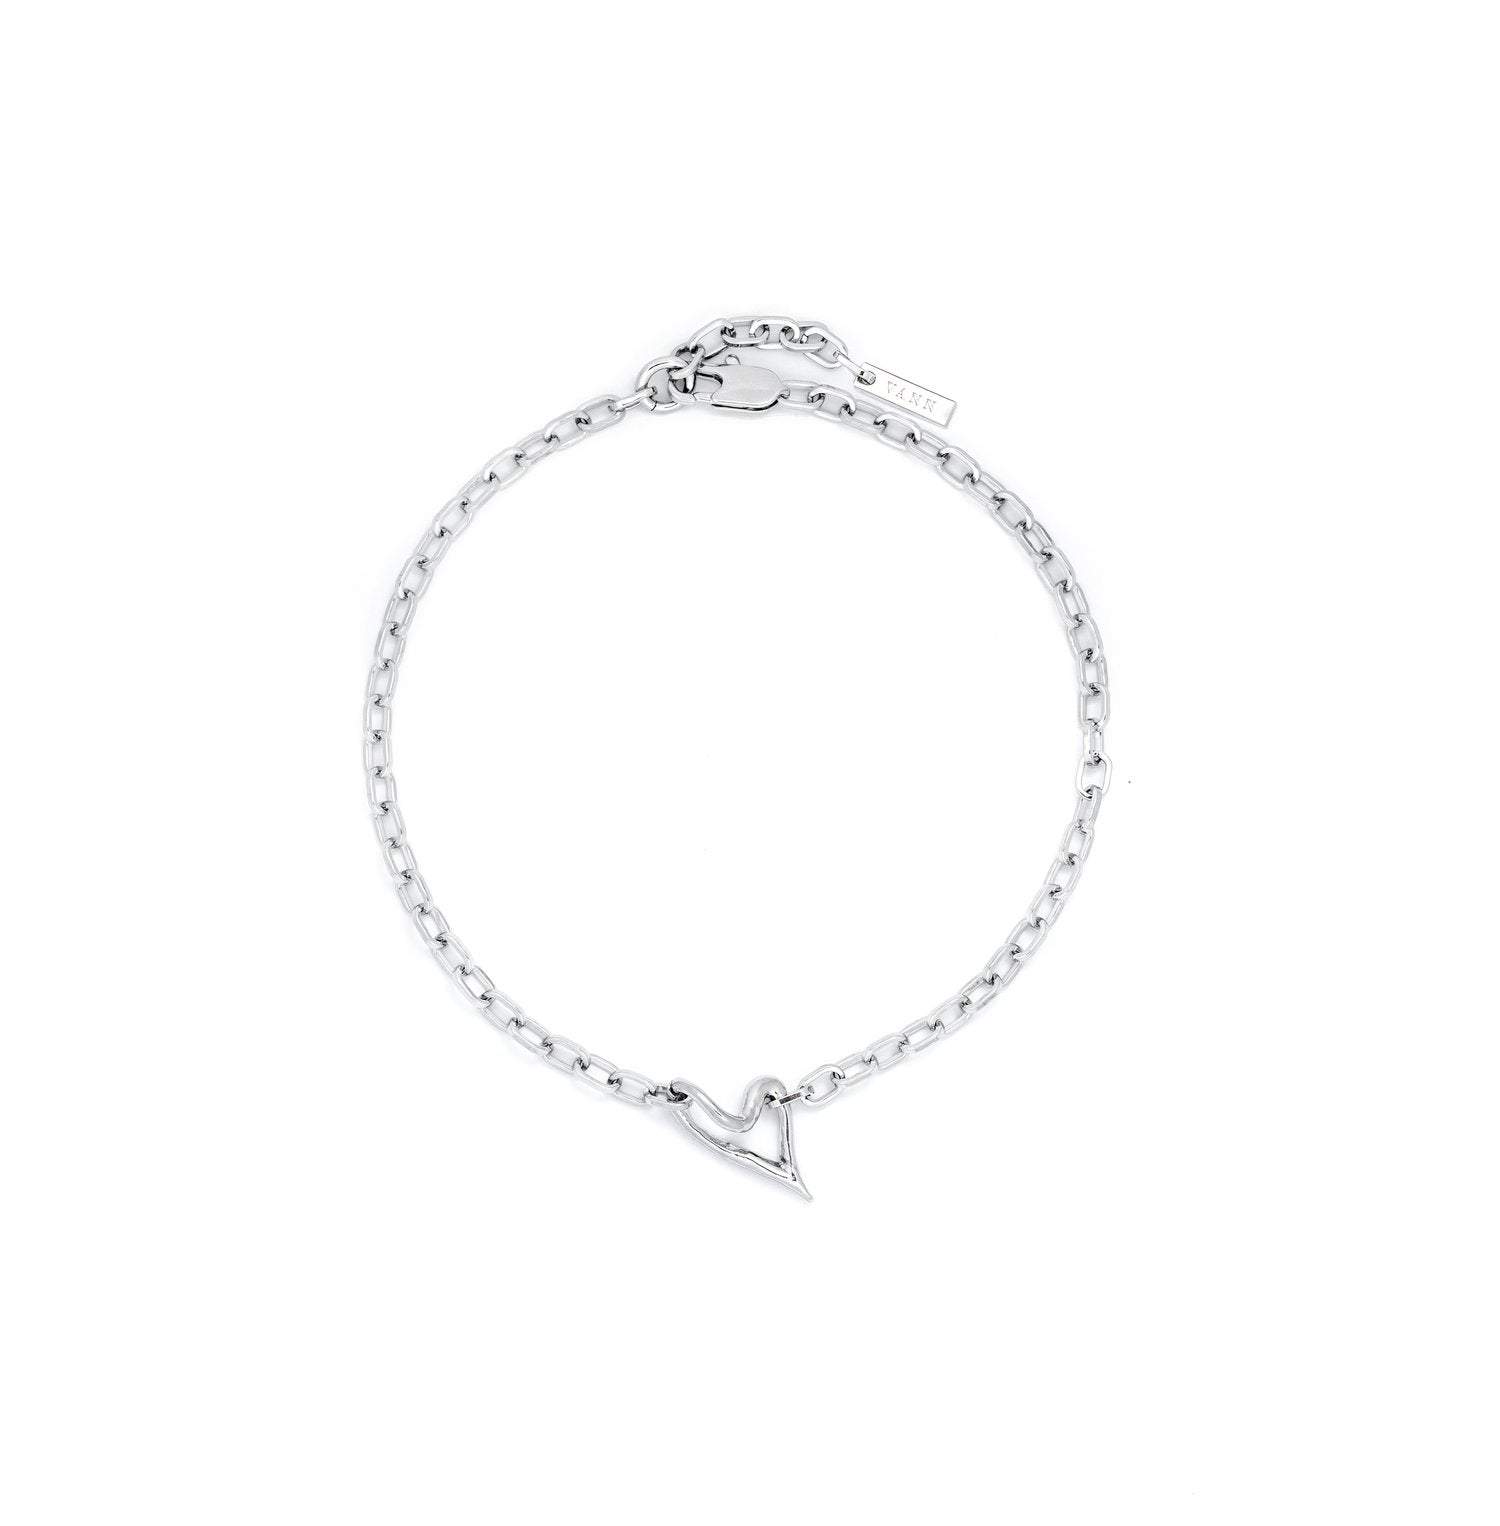 OUTLINE HEART CHOKER NECKLACE